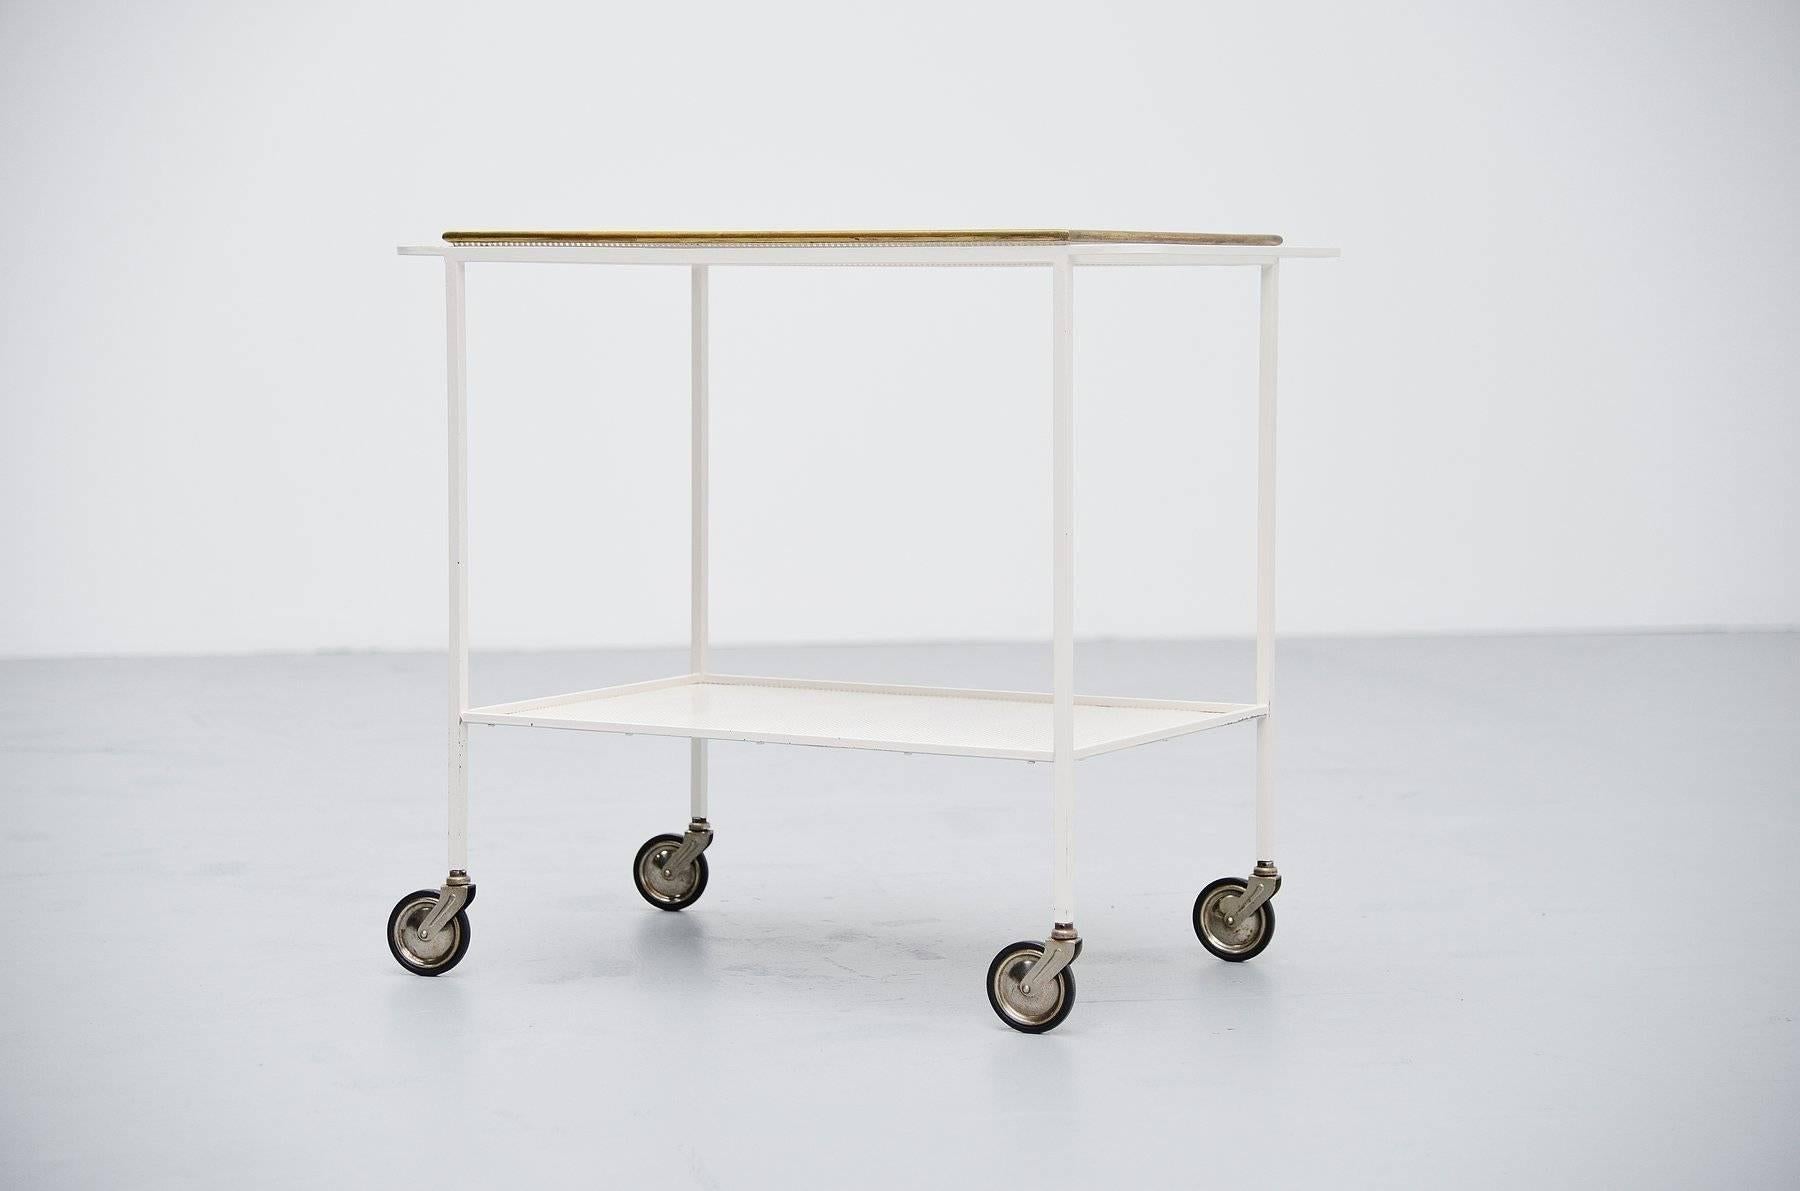 Modernist serving cart designed by Mathieu Mategot produced by Atelier Mategot, France, 1960. This serving cart is documented in the Mategot books so it’s a cart with references. This was made of whit lacquered metal and the serving tray has a brass